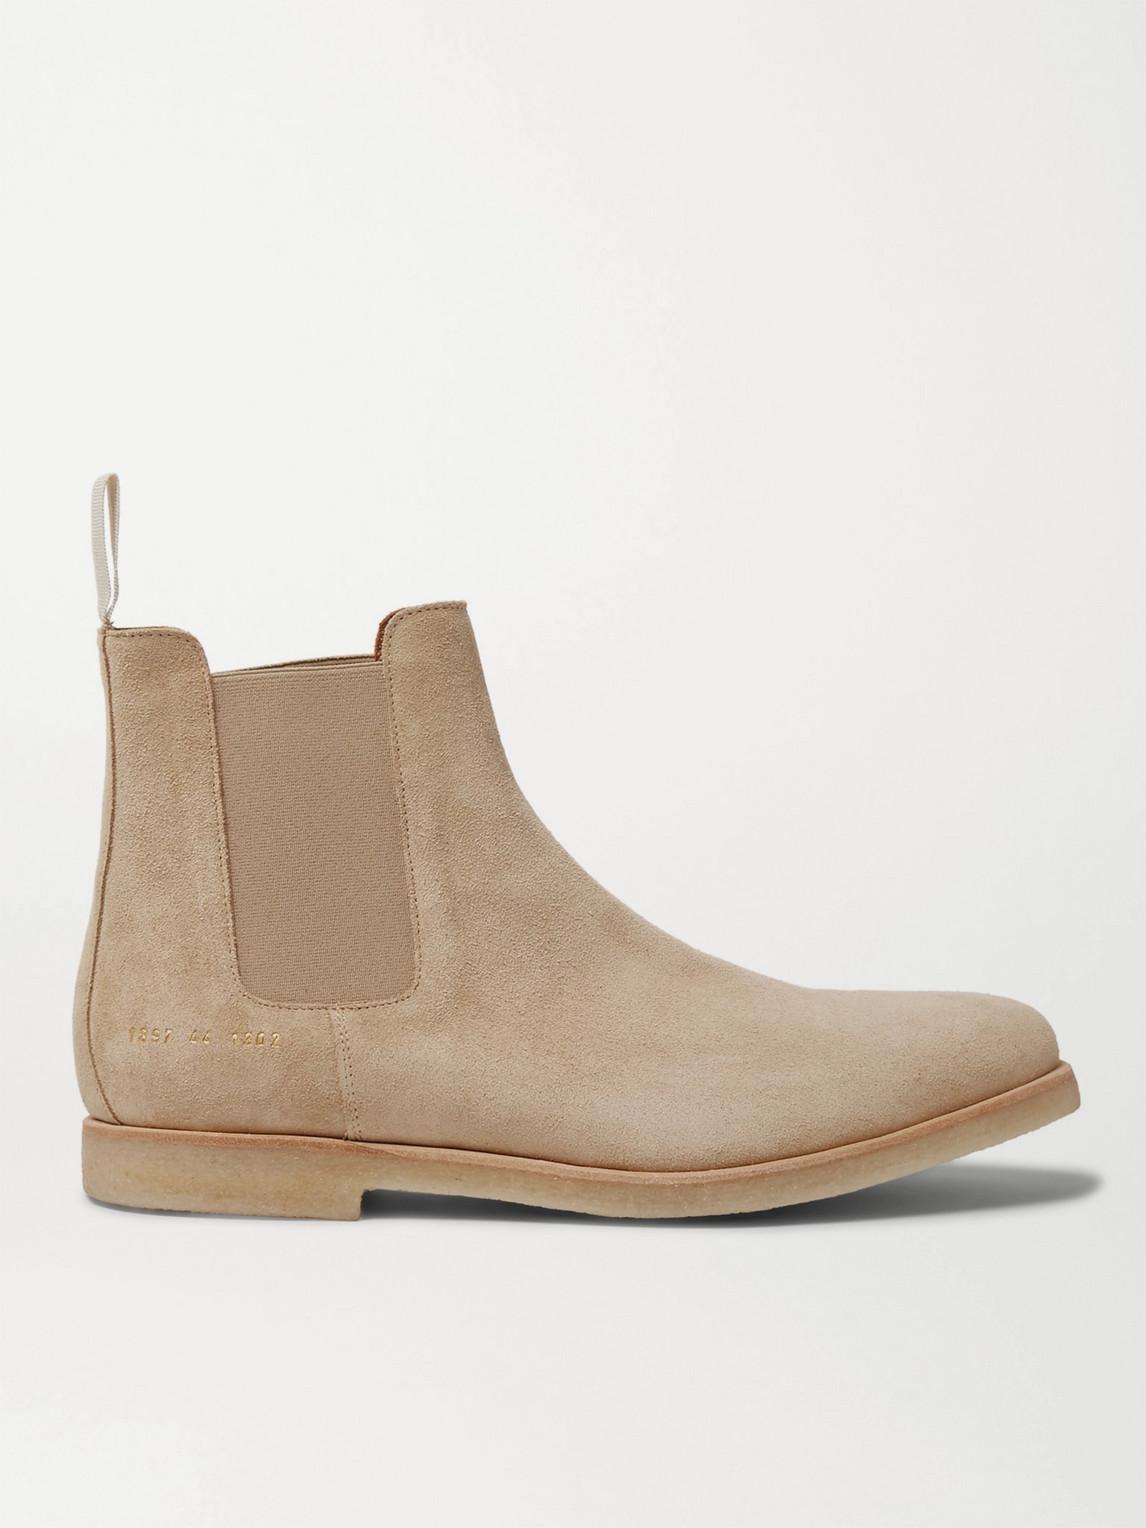 Common Projects Suede Chelsea Boots for Men | Lyst Australia